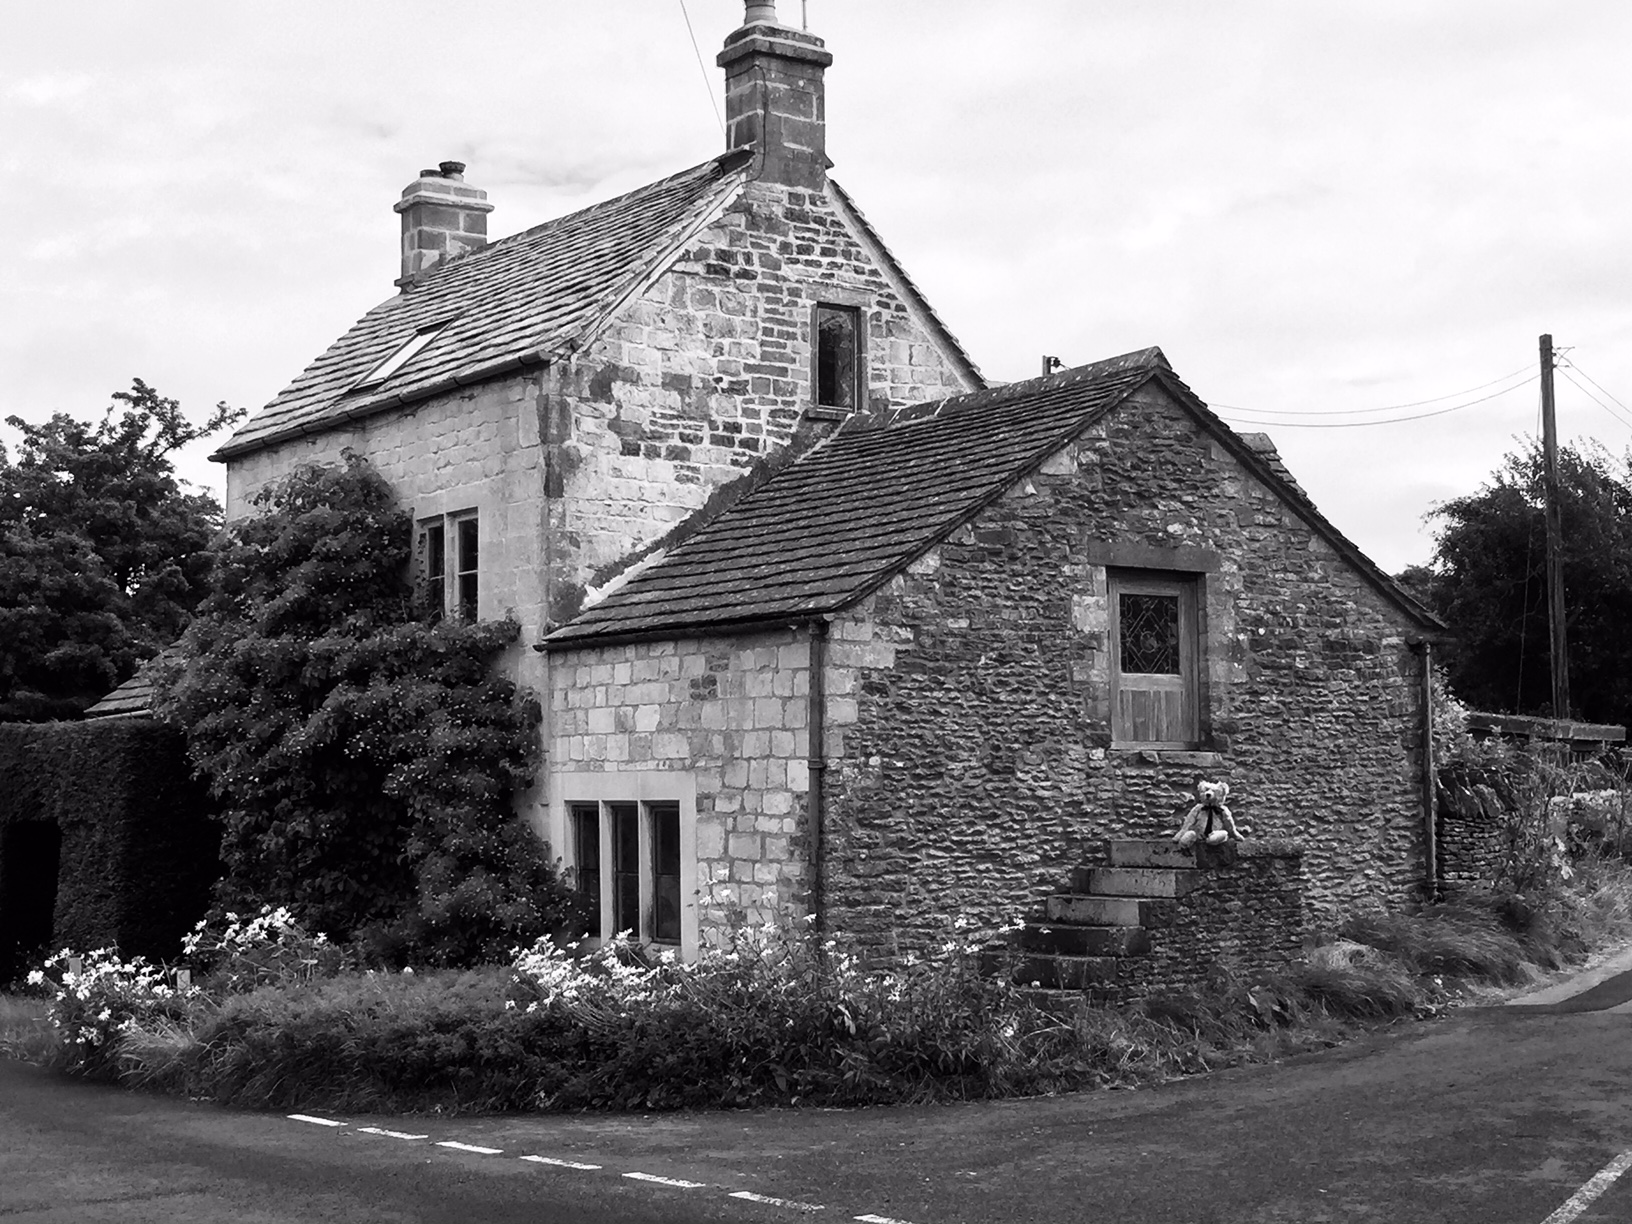 Cotswold Granny: And finally, back to Frank Mansell’s House at Salt Box near Sheepscombe. One of his poems described his feelings about selling it to a town dweller. Here it is...